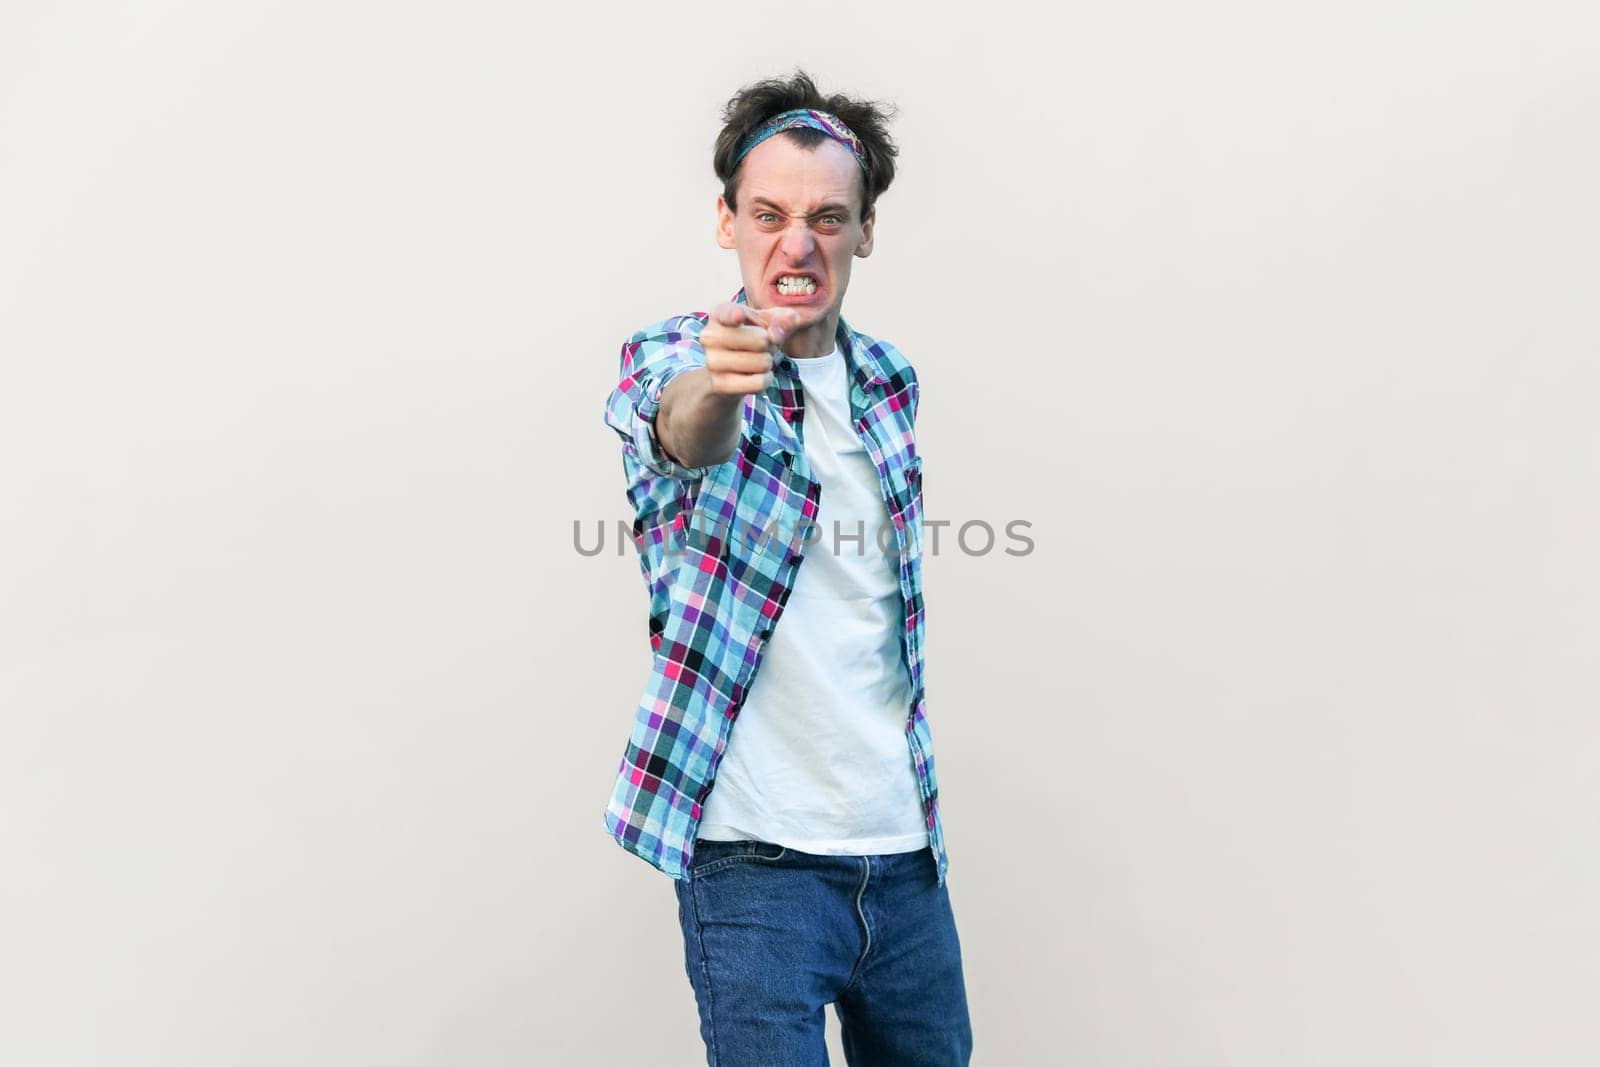 Furious angry man looses temper, screams and points at you, blames someone and expresses negative emotions, wearing checkered shirt and headband. Indoor studio shot isolated on gray background.